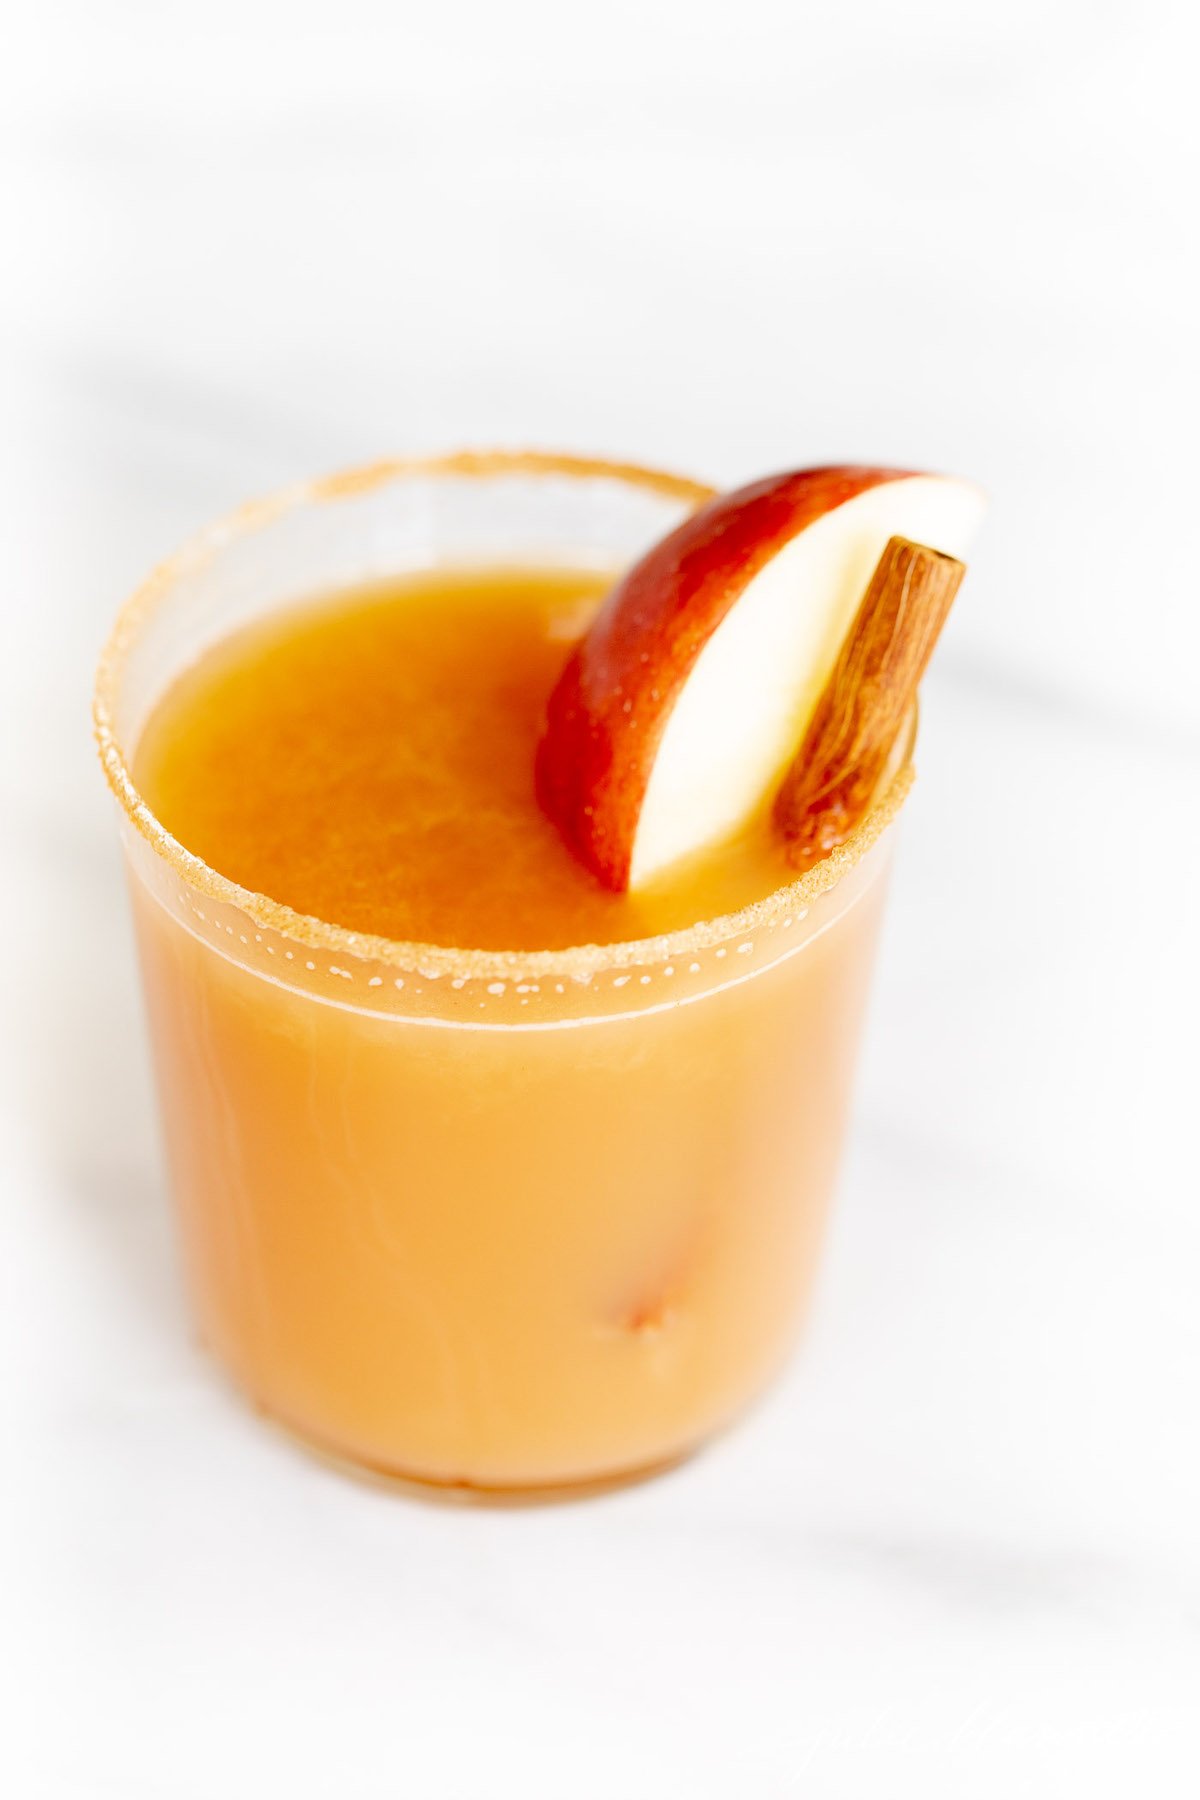 Cinnamon toast cocktail in a glass on marble surface, garnished with apple slice and cinnamon sticks.